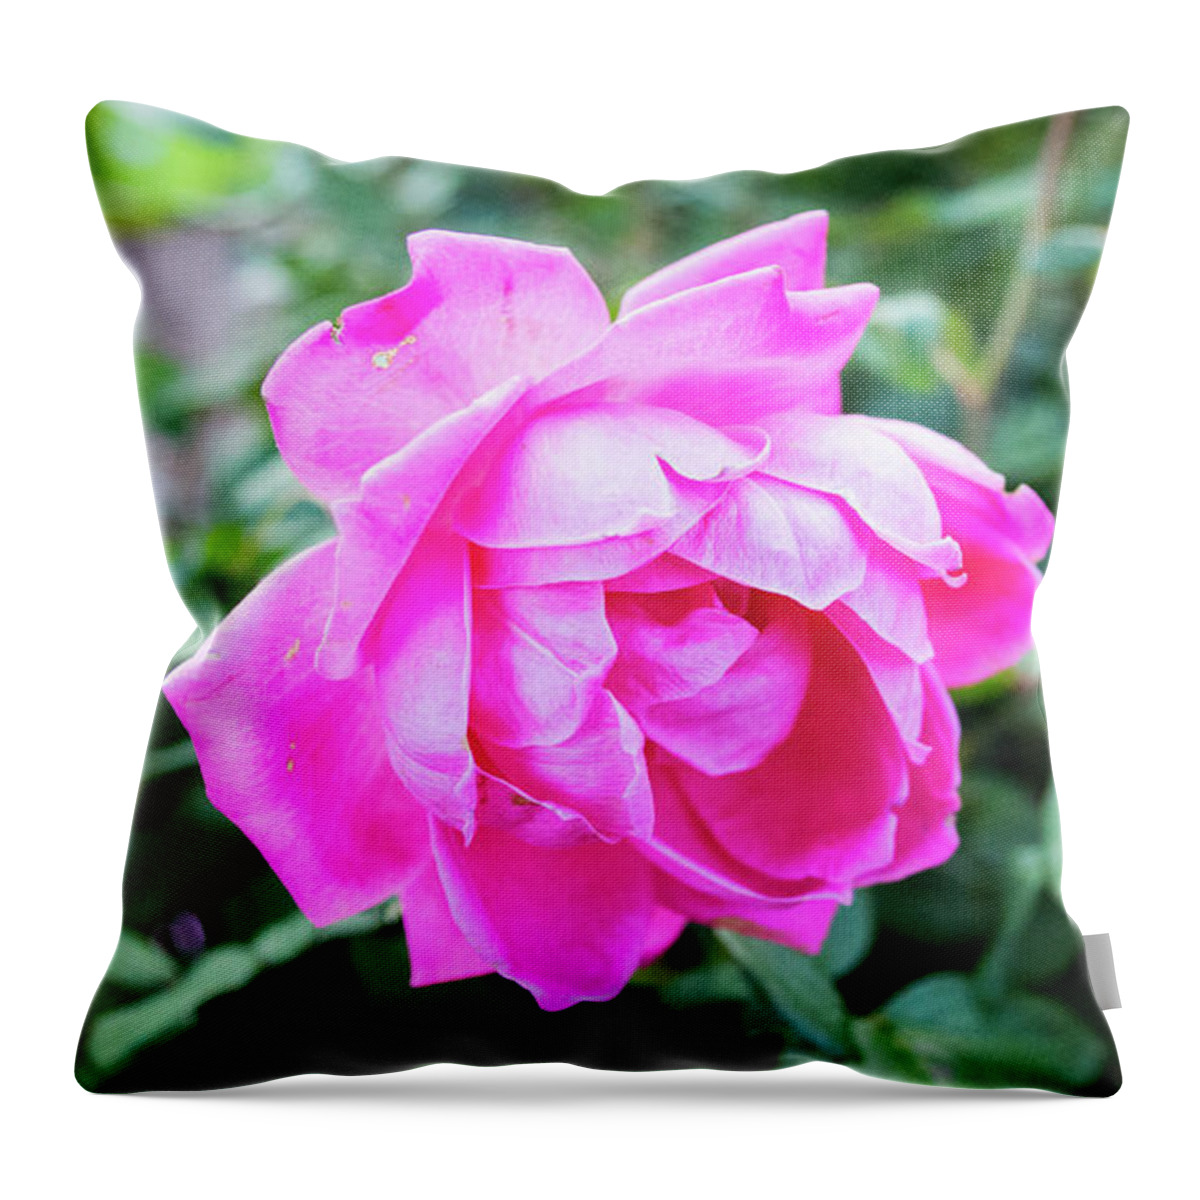 Roses Throw Pillow featuring the photograph Fuchsia Roses by Lisa Blake